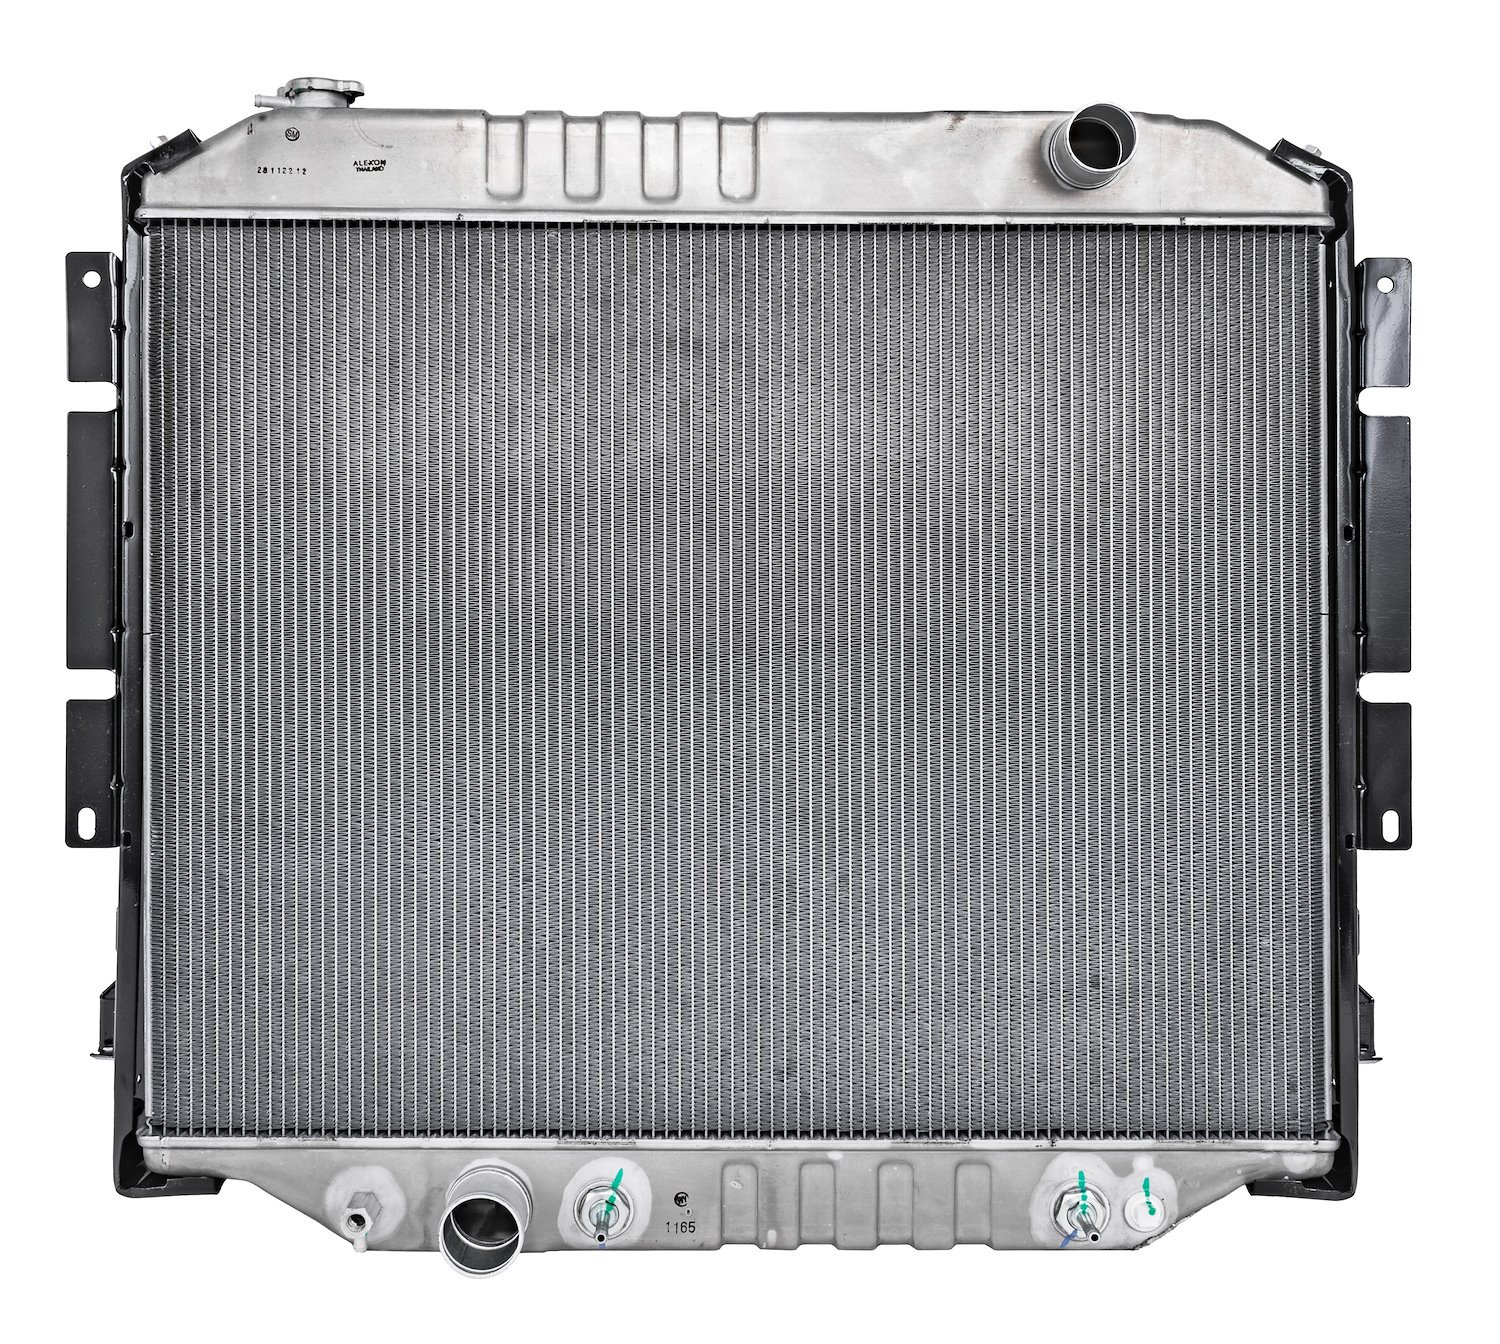 Ready-Fit Aluminum Radiator for 1983-1987 Ford F-Series Trucks w/6.9L & 1988-1994 Ford F-Series Trucks w/7.3L Diesel Engines